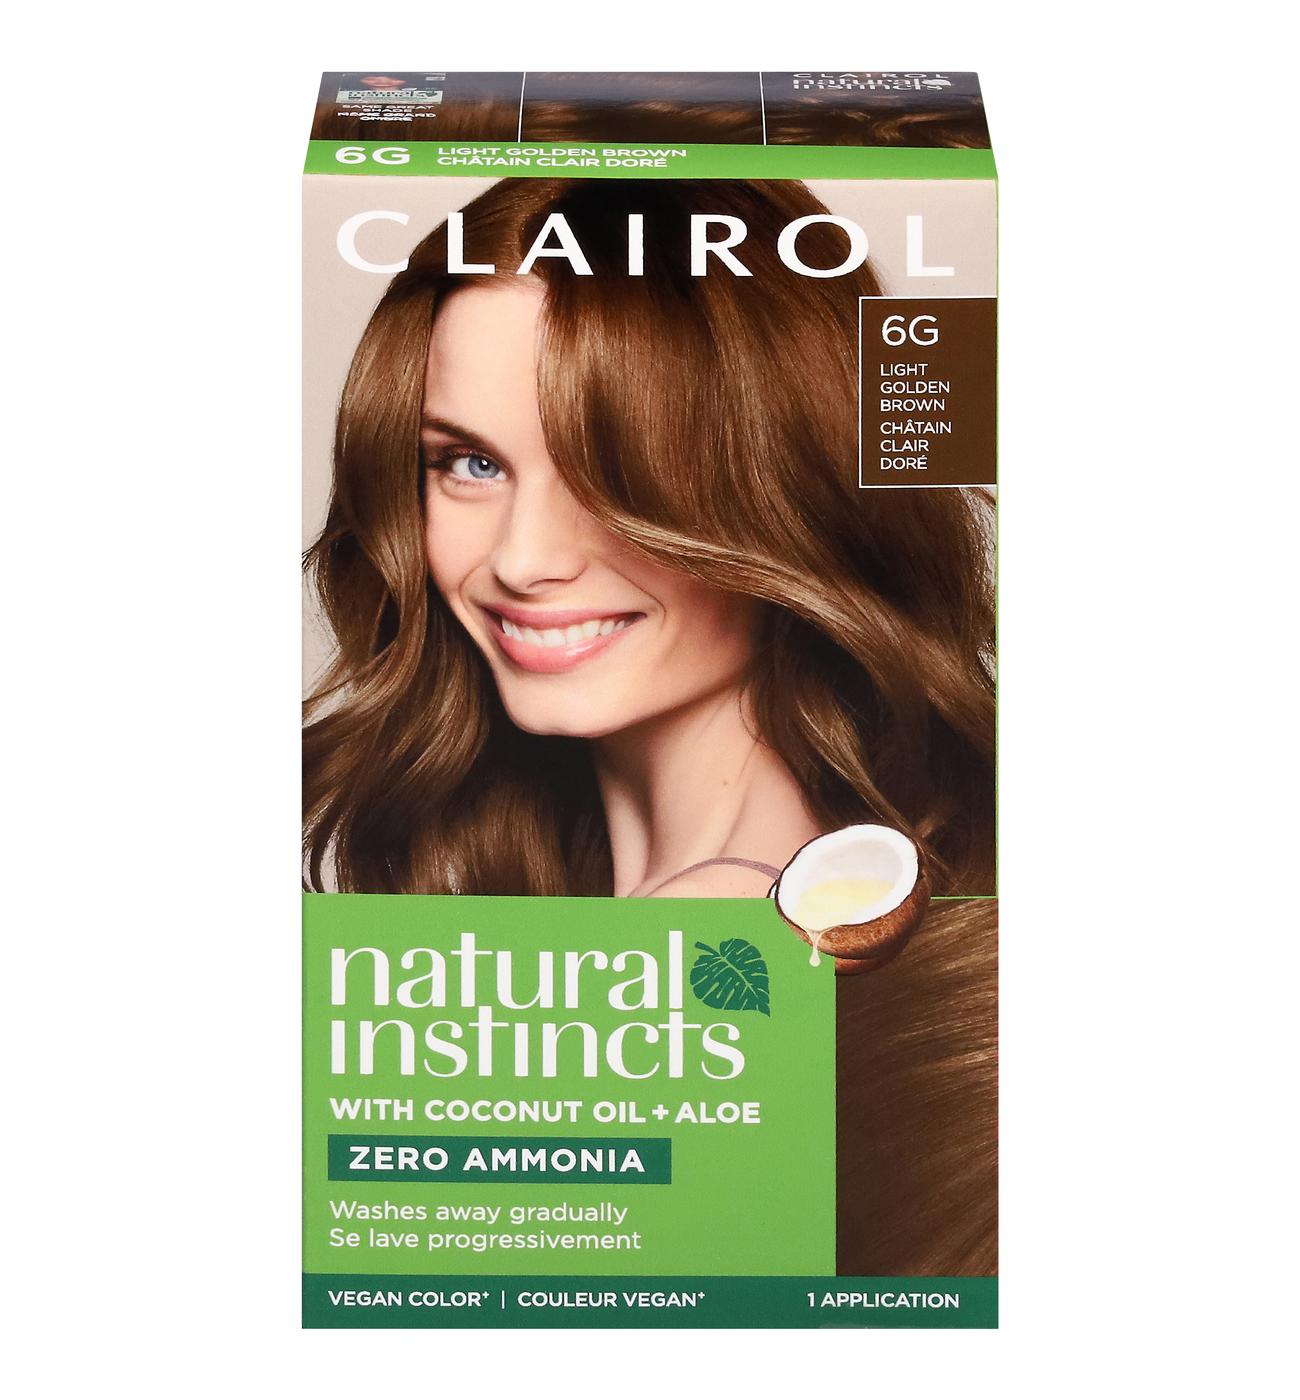 Clairol Natural Insticts Vegan Demi-Permanent Hair Color - 6G Light Golden Brown; image 1 of 11